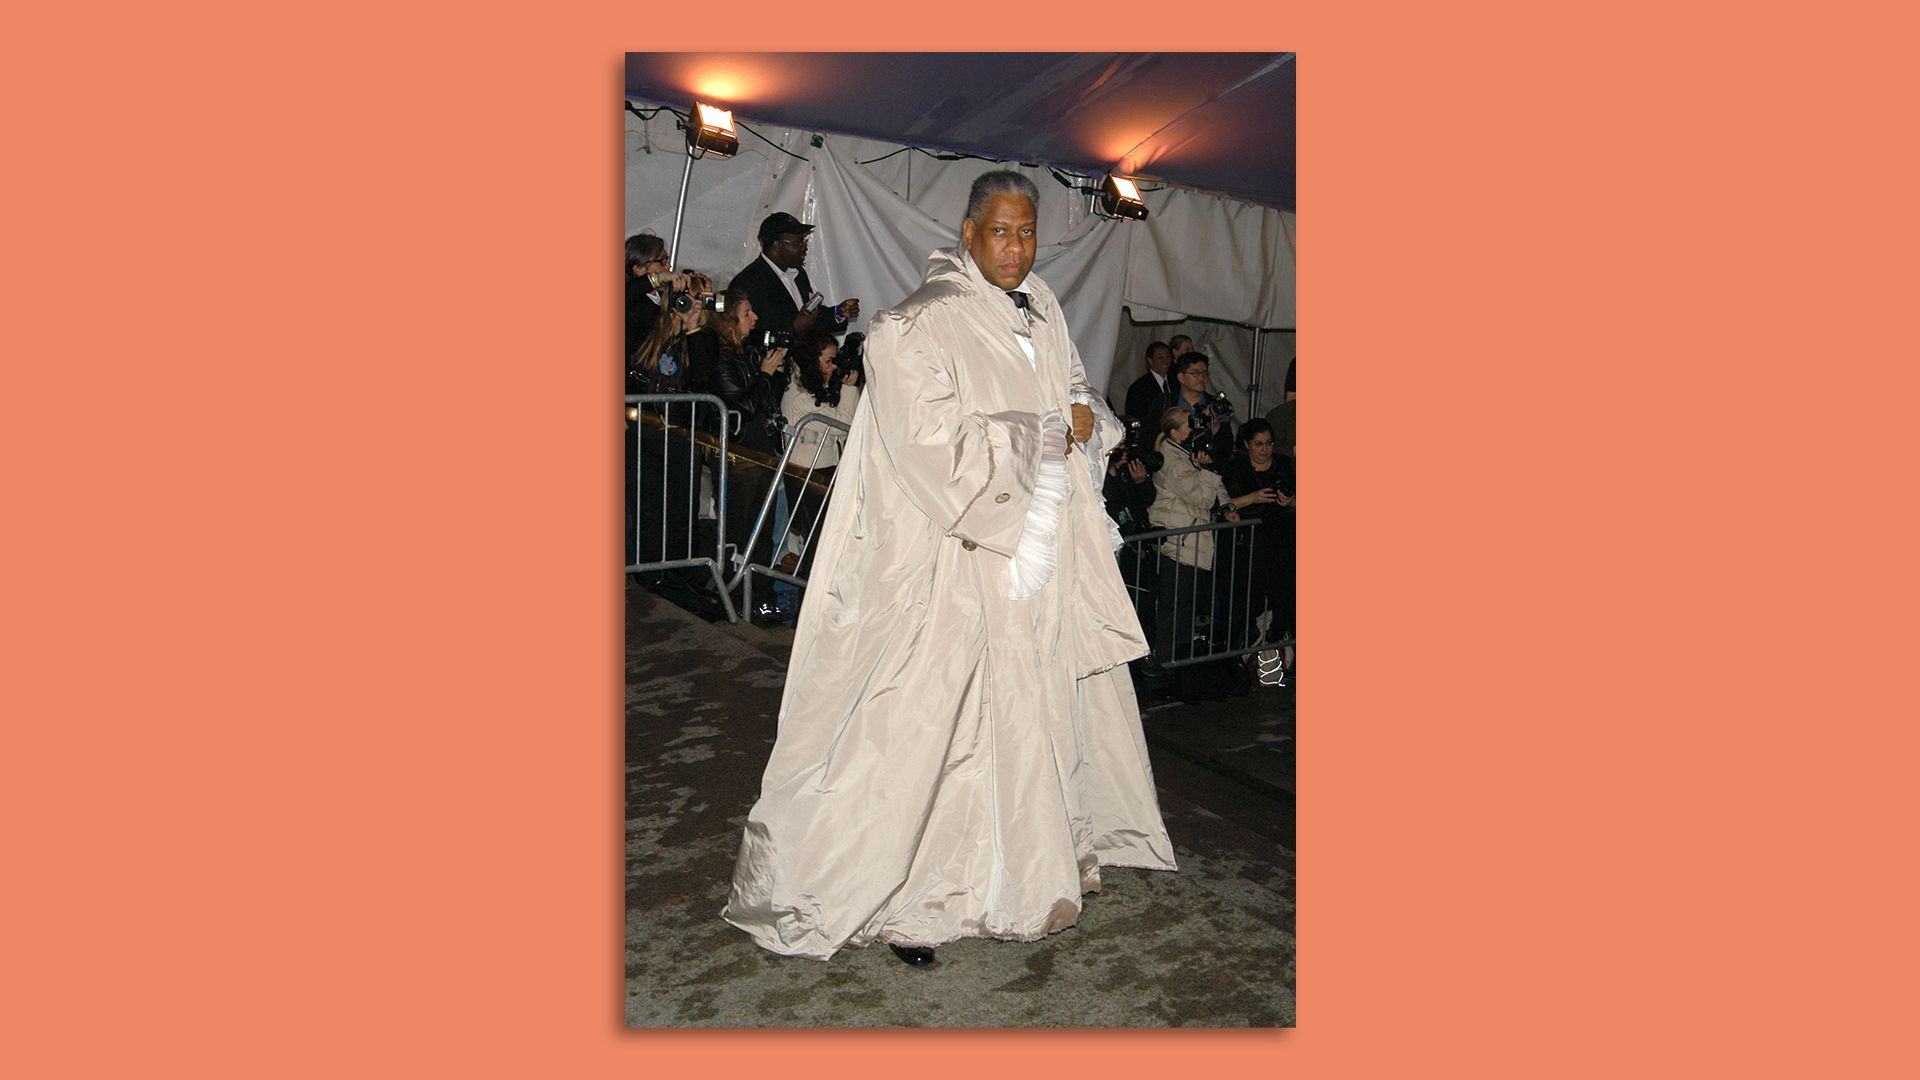 Andre Leon Talley during 2004 Costume Institute Gala in a beige gown